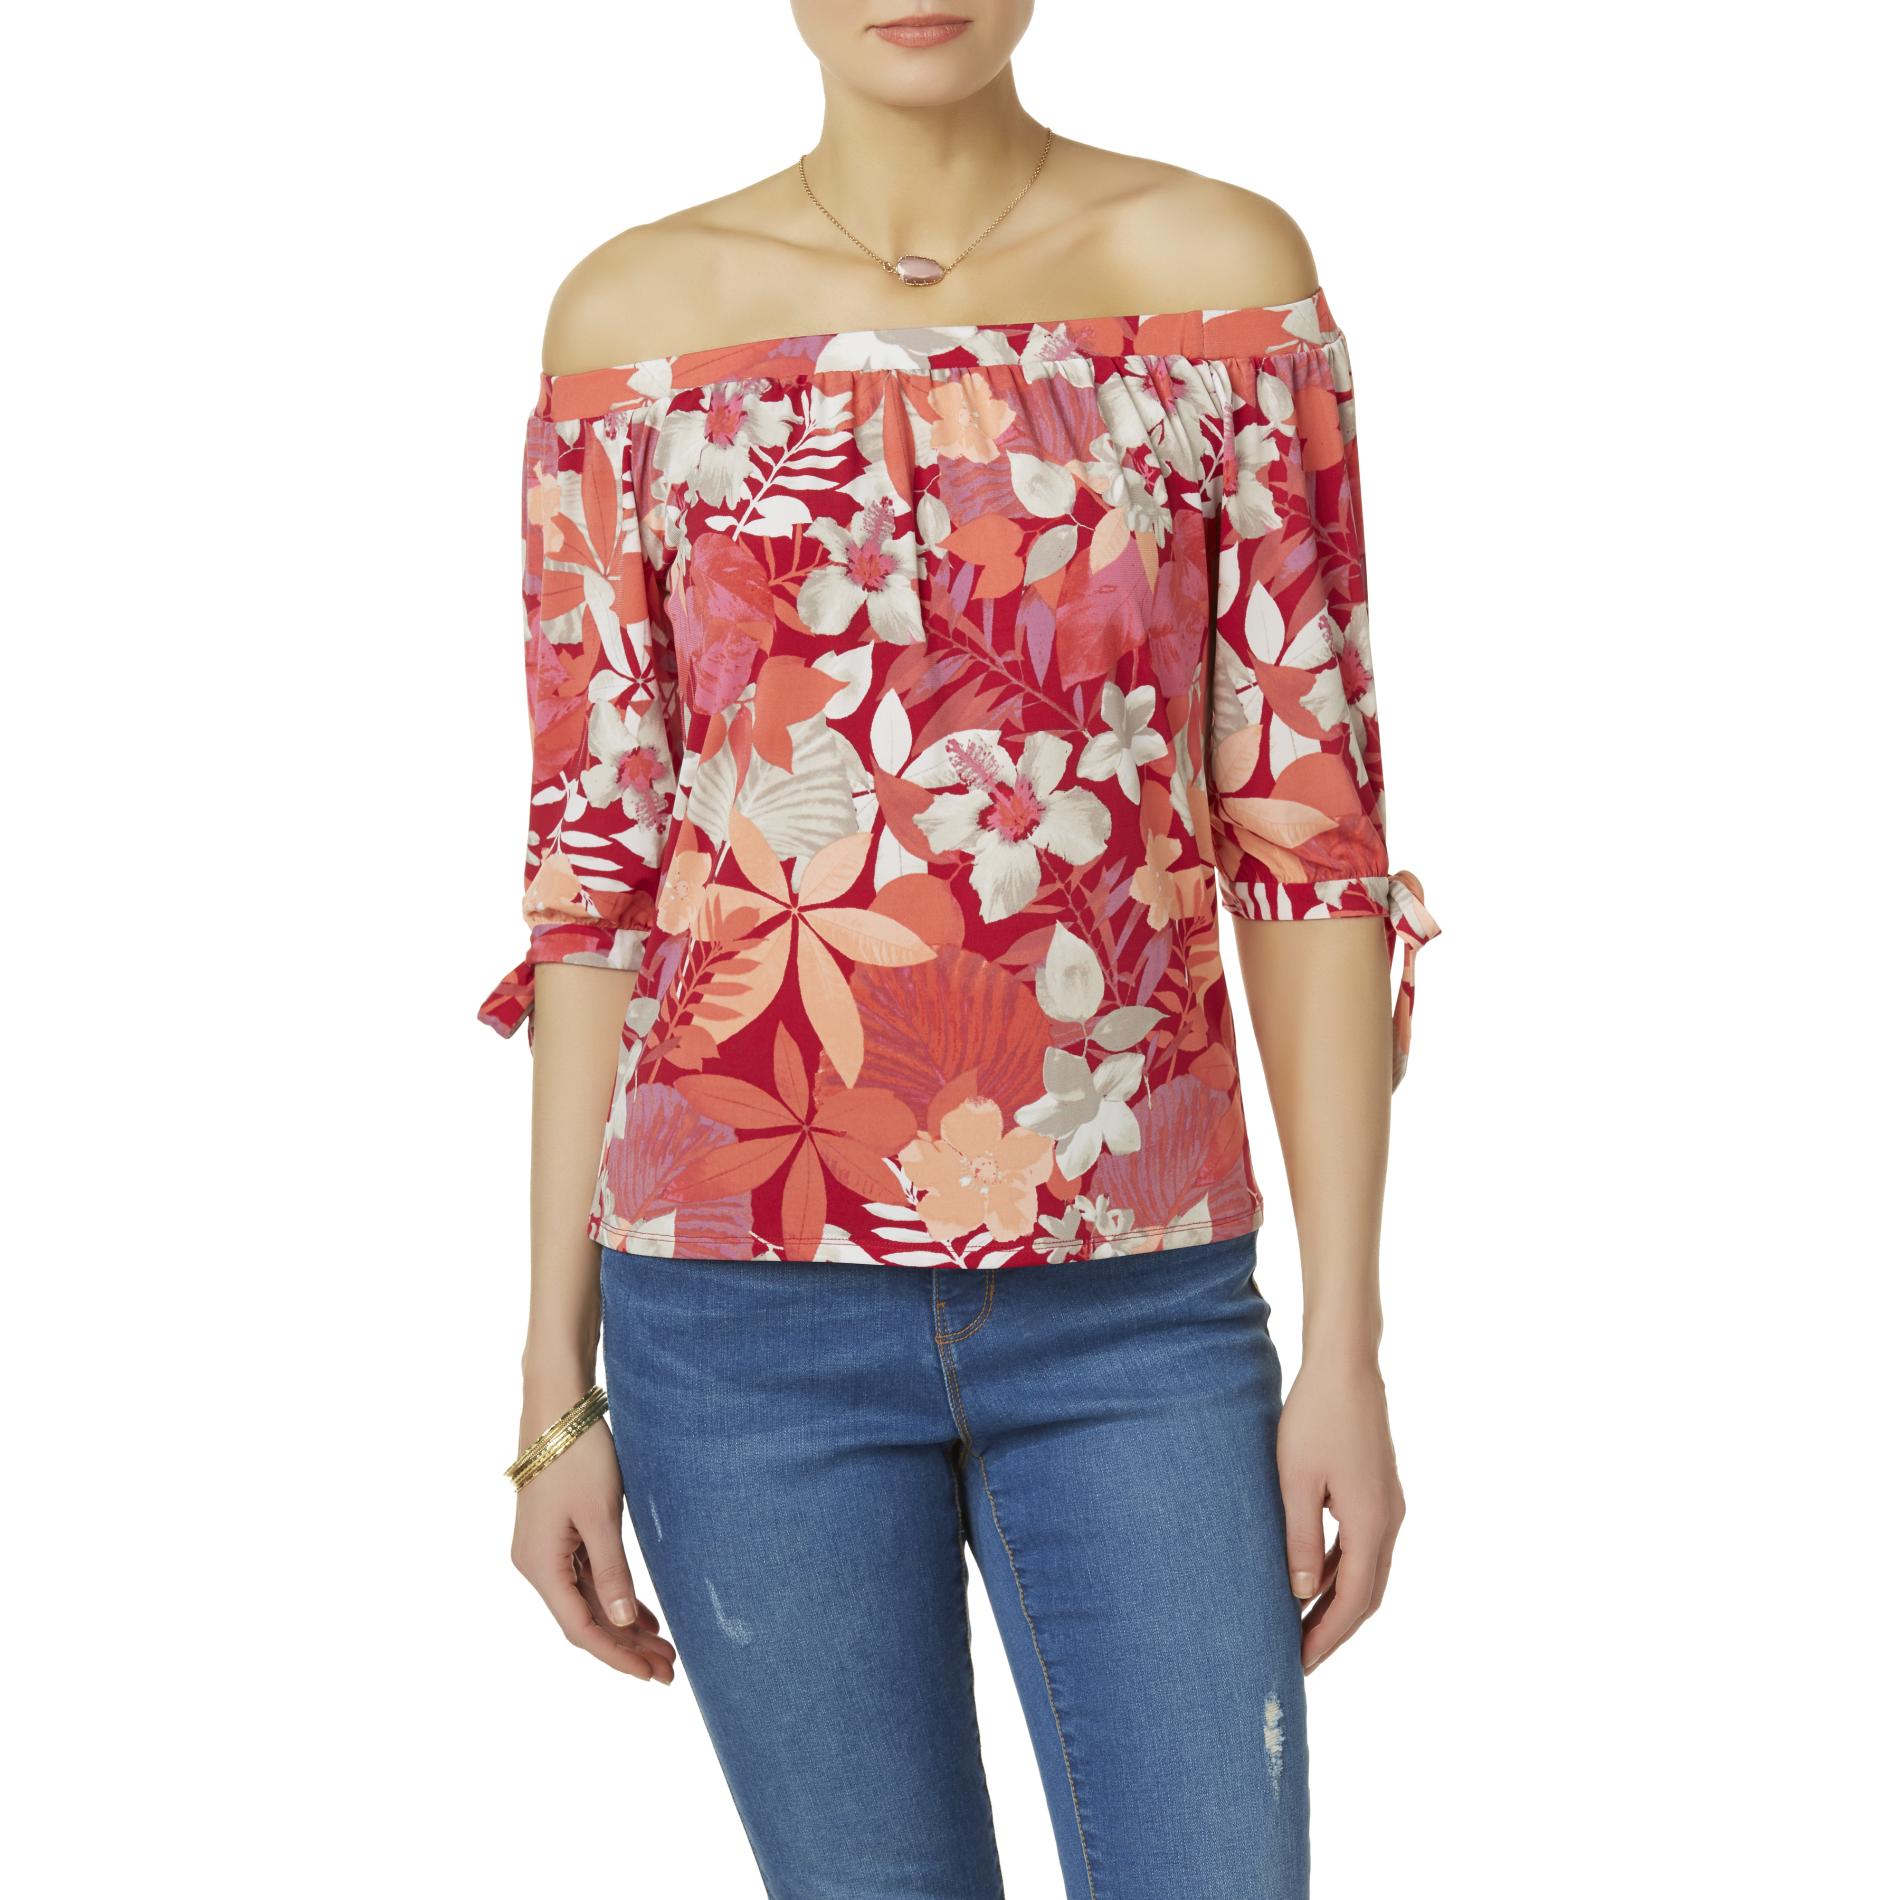 Simply Styled Women's Off-the-Shoulder Top - Floral